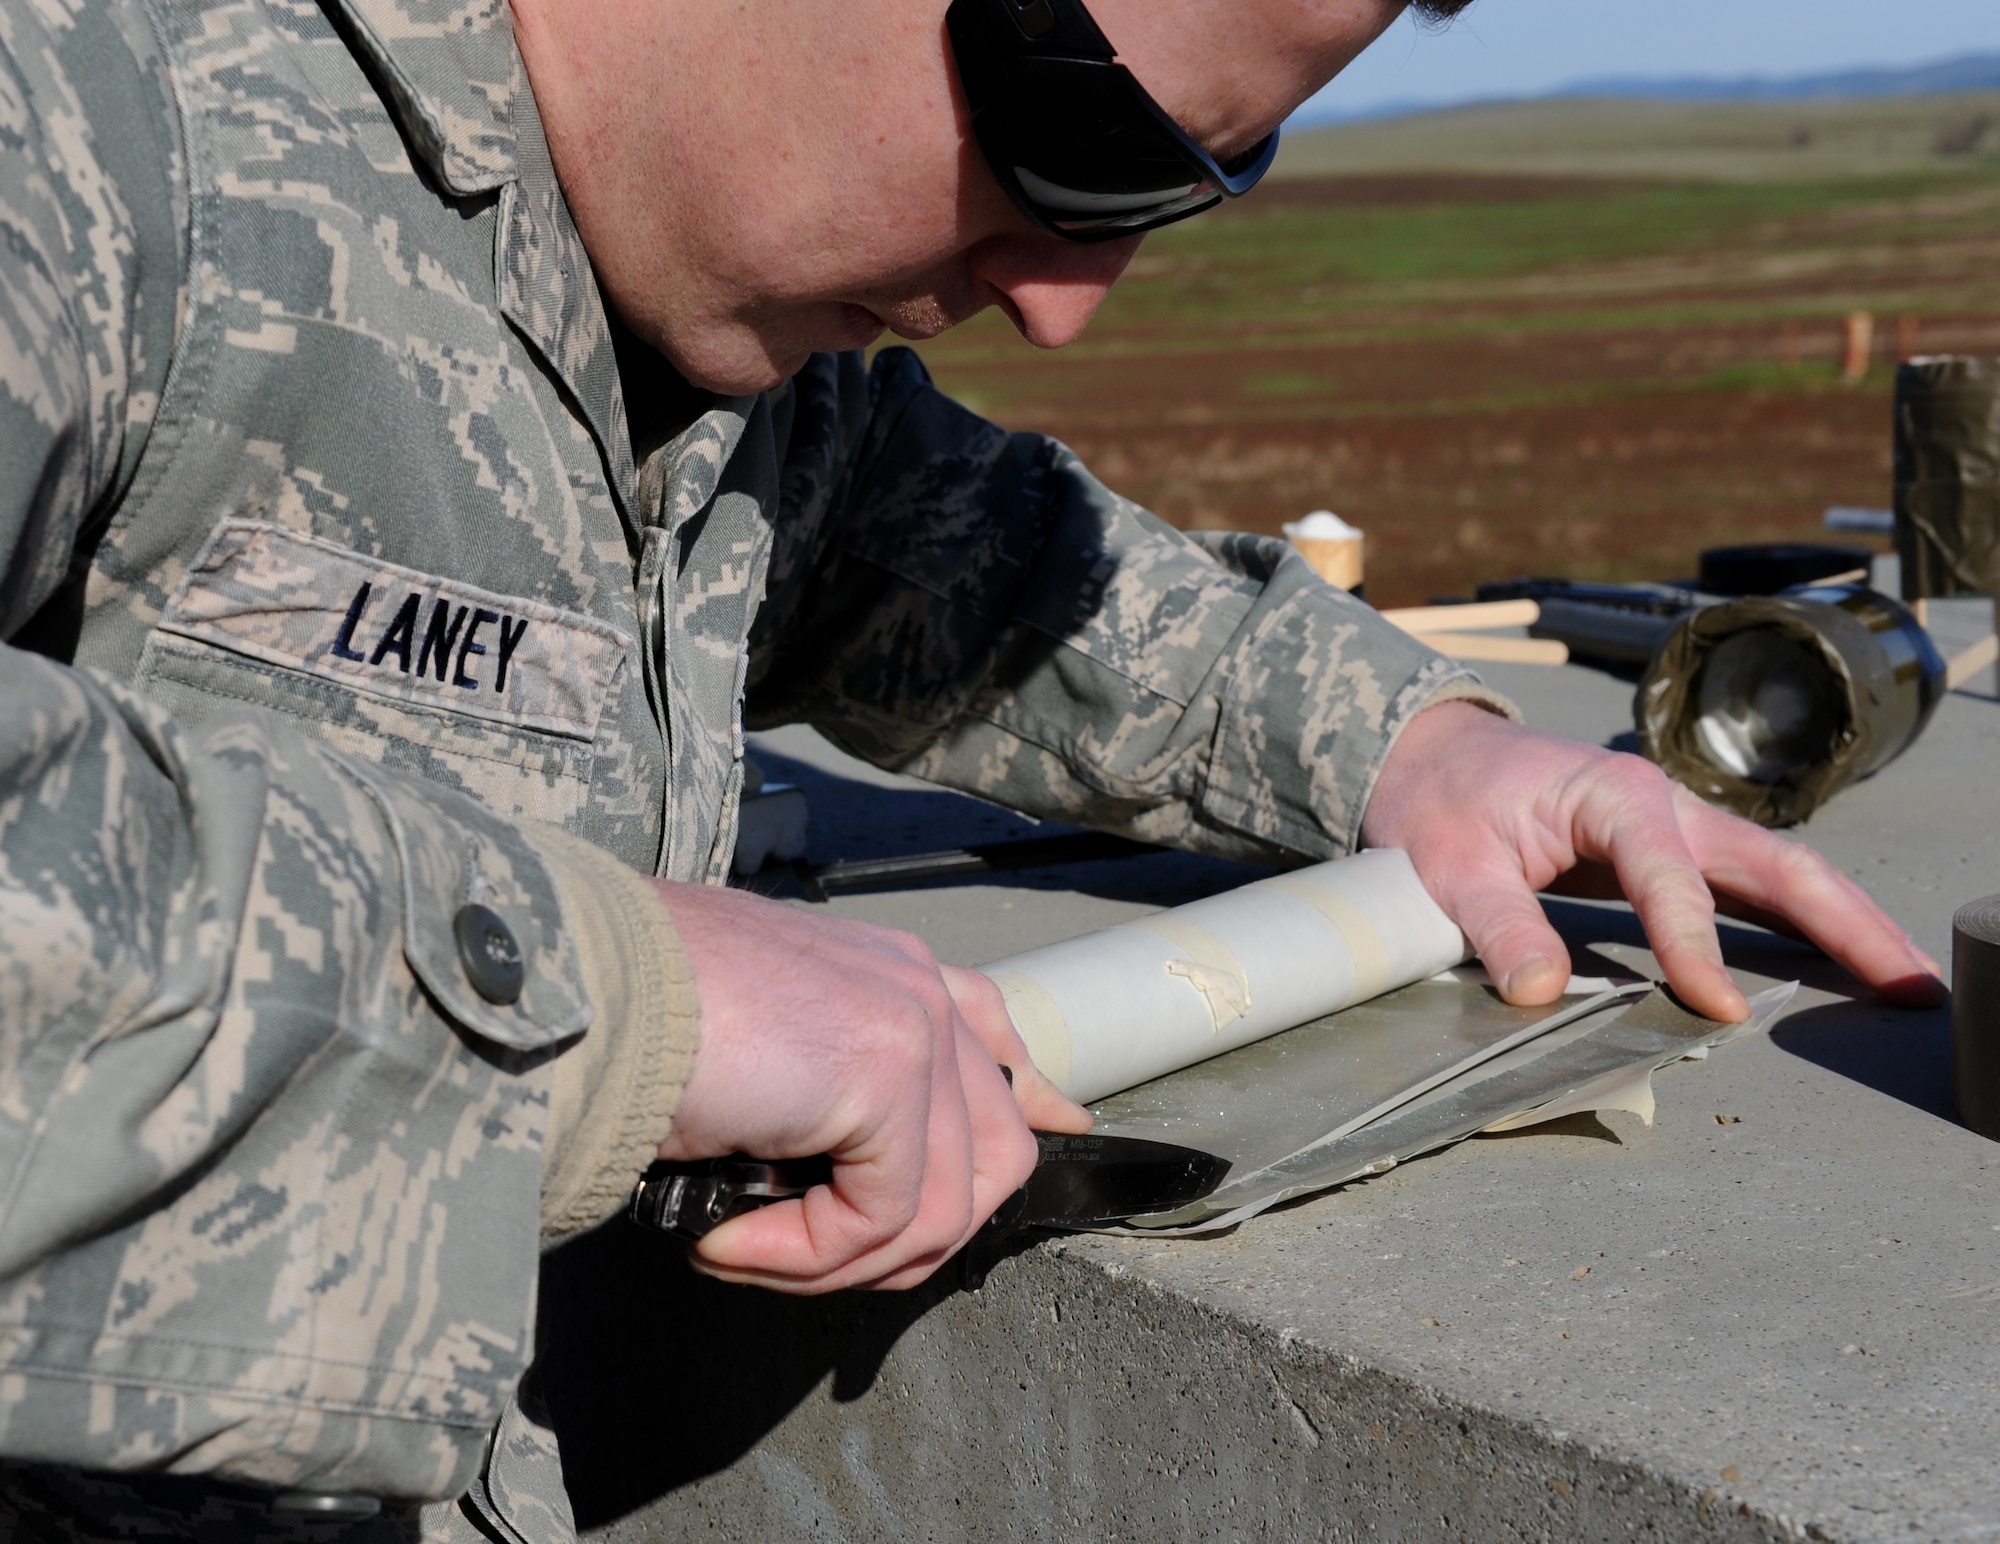 Staff Sgt. Robert Laney, 9th Civil Engineer Squadron explosive ordinance disposal technician, cuts a piece of plasticized explosive DATA sheet during a training scenario at the EOD range on Beale Air Force Base, Calif., Dec. 19, 2012. EOD Airmen train with different types of explosives to simulate what they may encounter in the field. (U.S. Air Force photo by Staff Sgt. Robert M. Trujillo/Released)